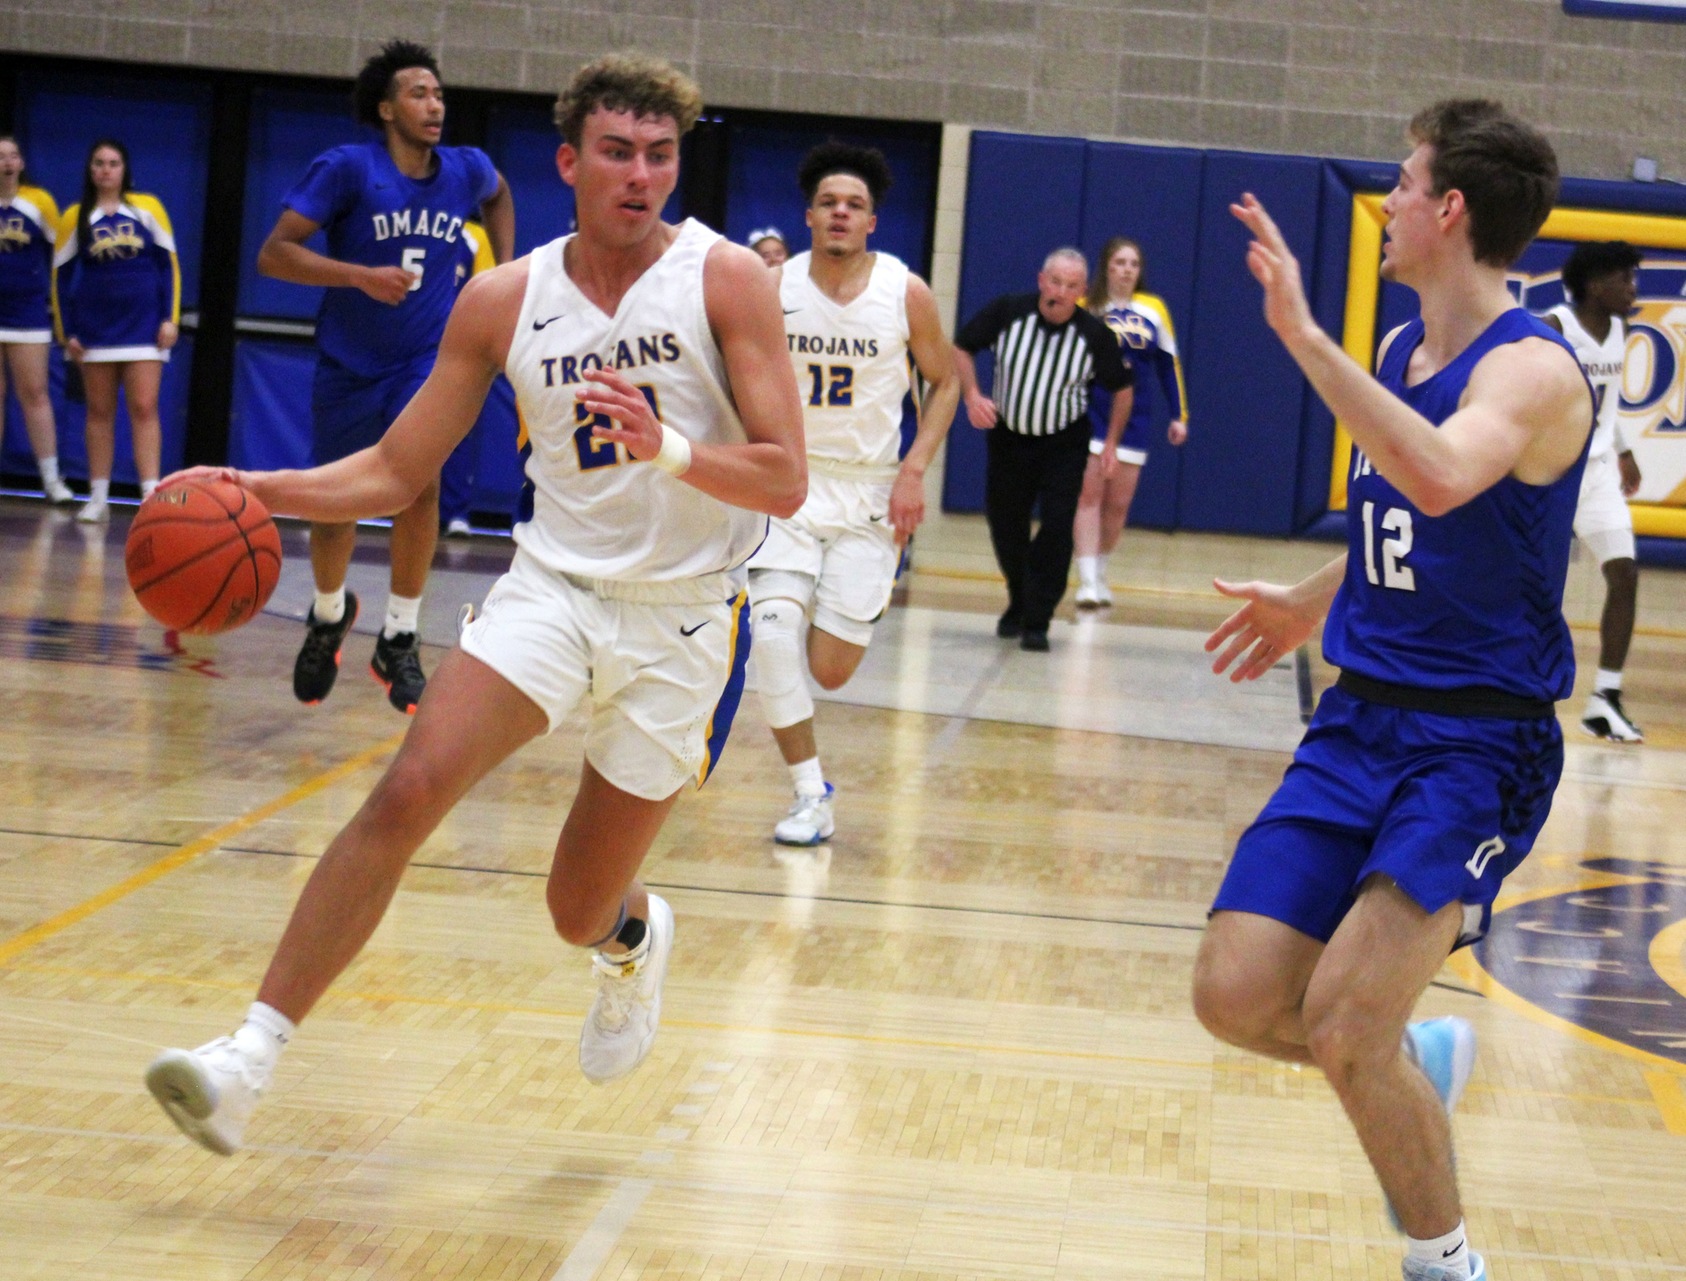 NIACC's Chandler Dean drives to the basket in game earlier this season against DMACC.